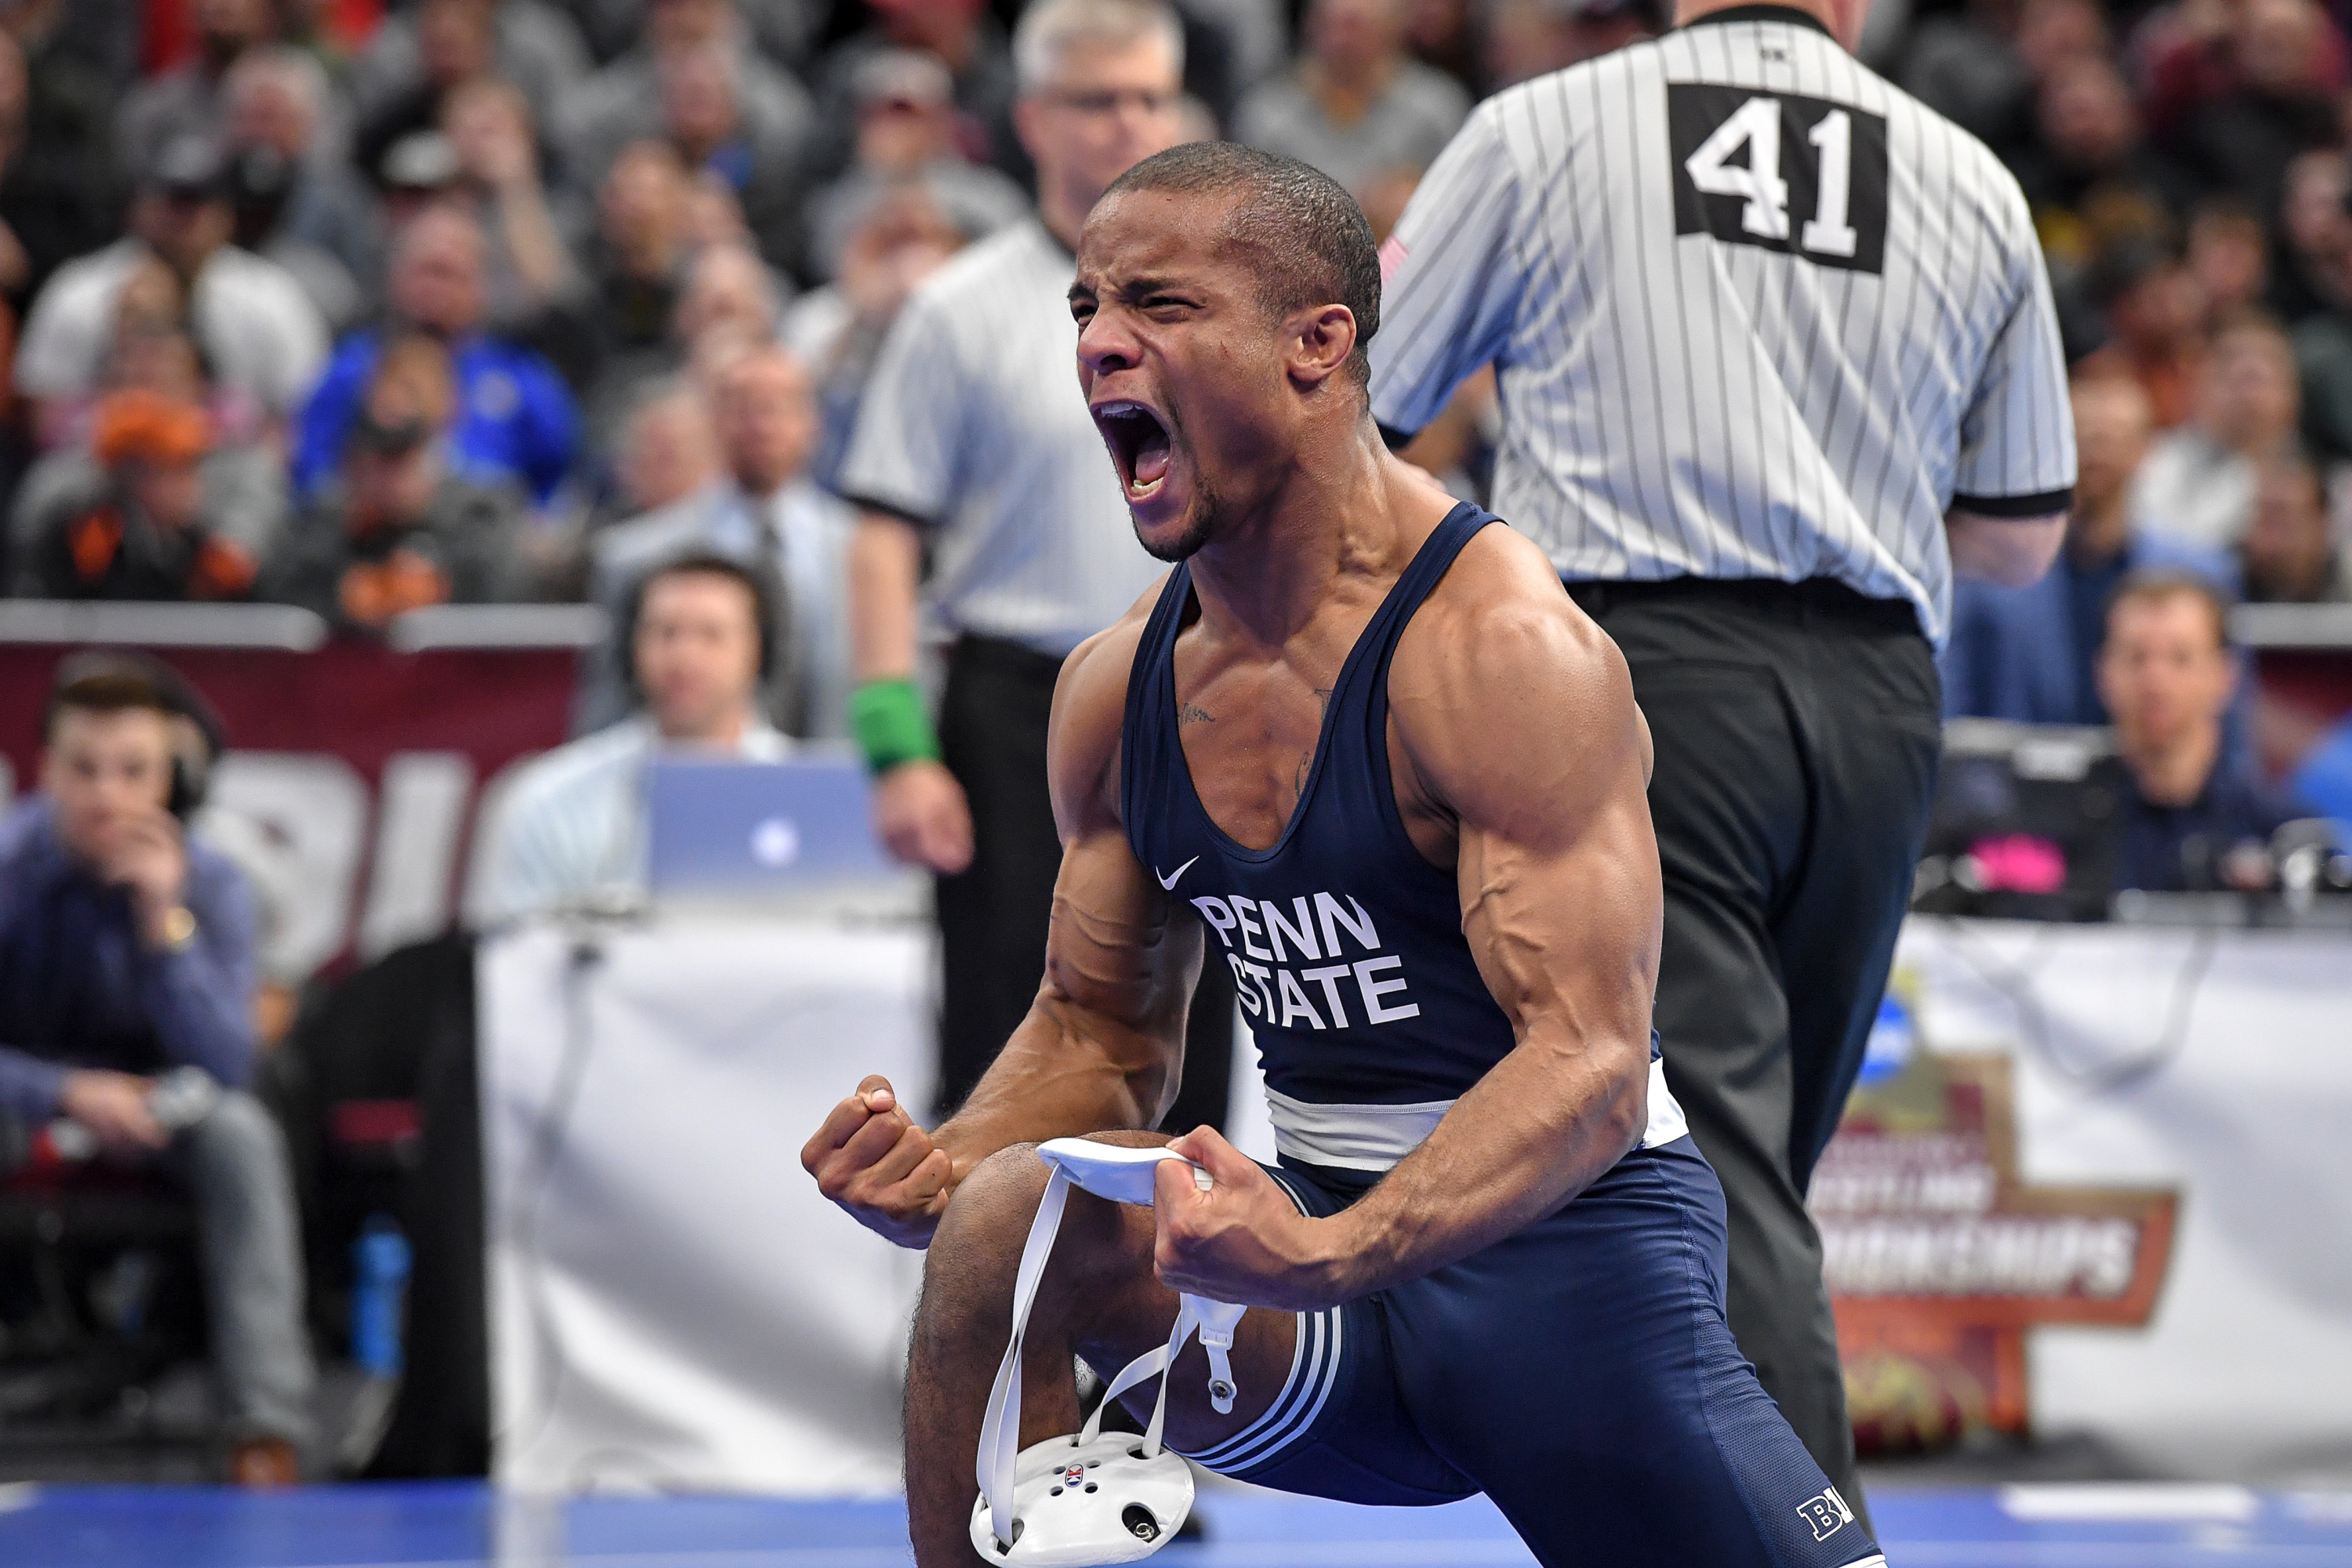 Find more Mark Hall Wins Pan American Games Title Penn State University. 